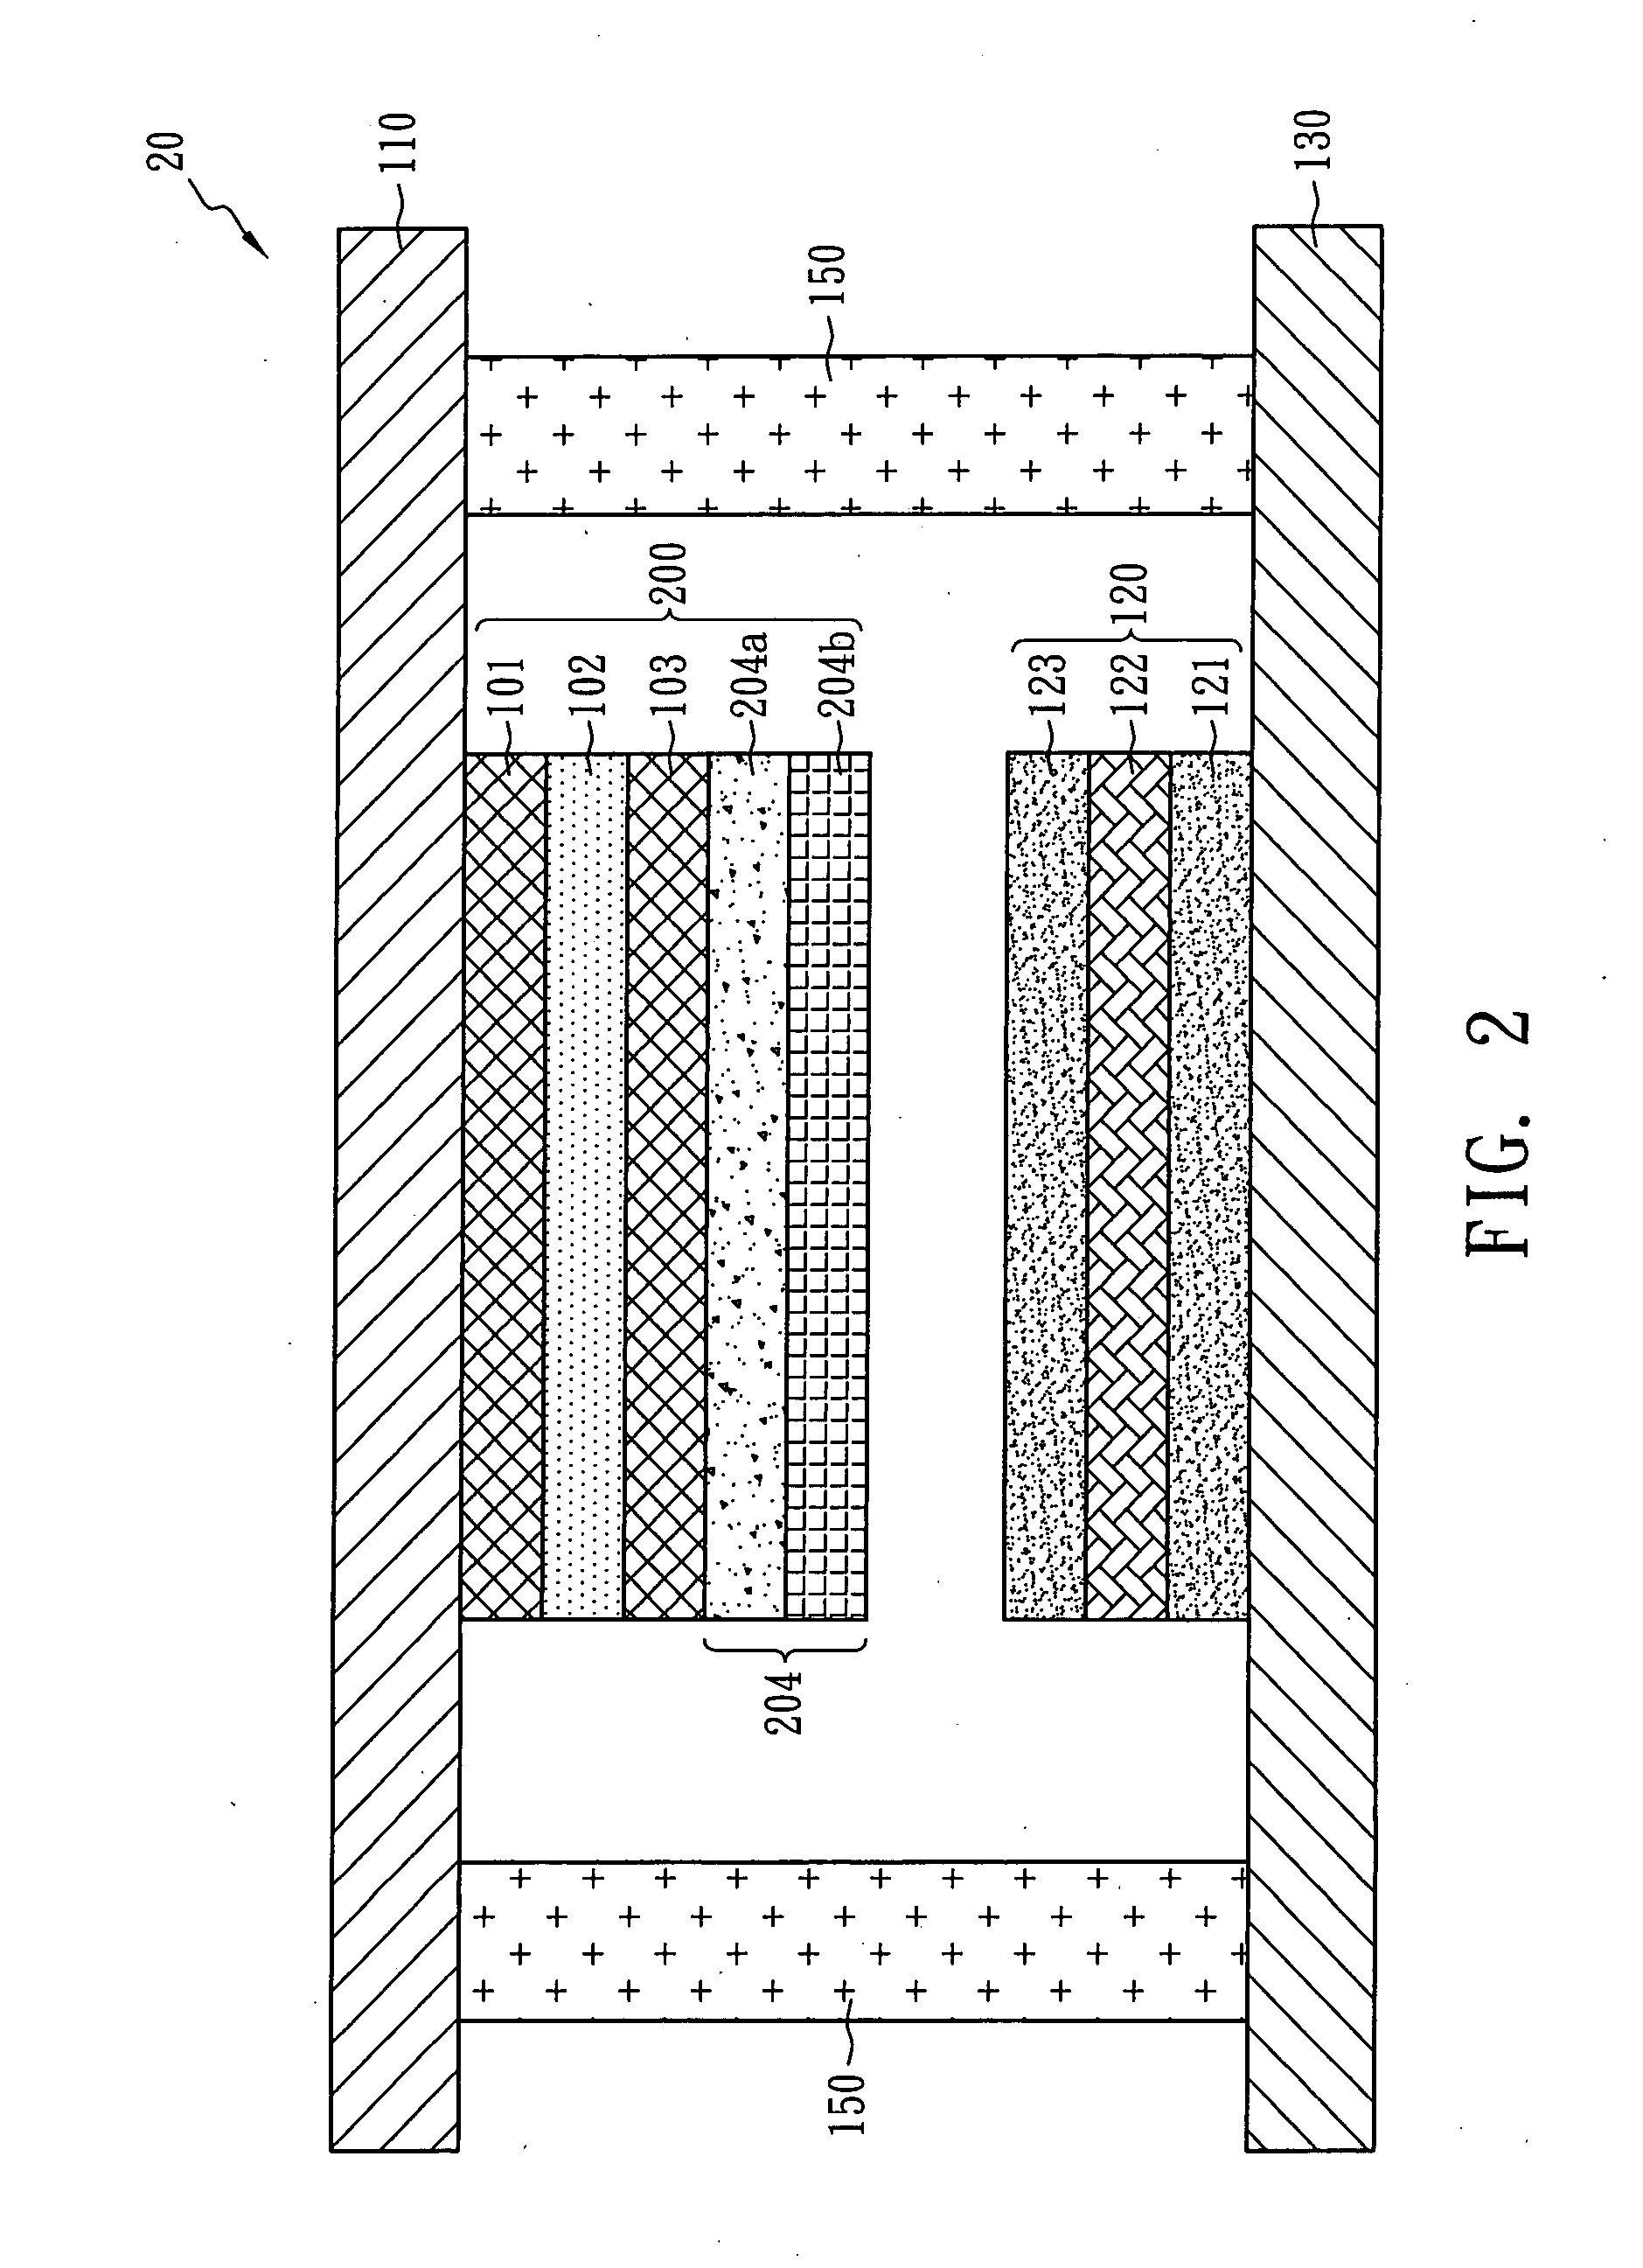 Top-emitting OLED display having transparent touch panel